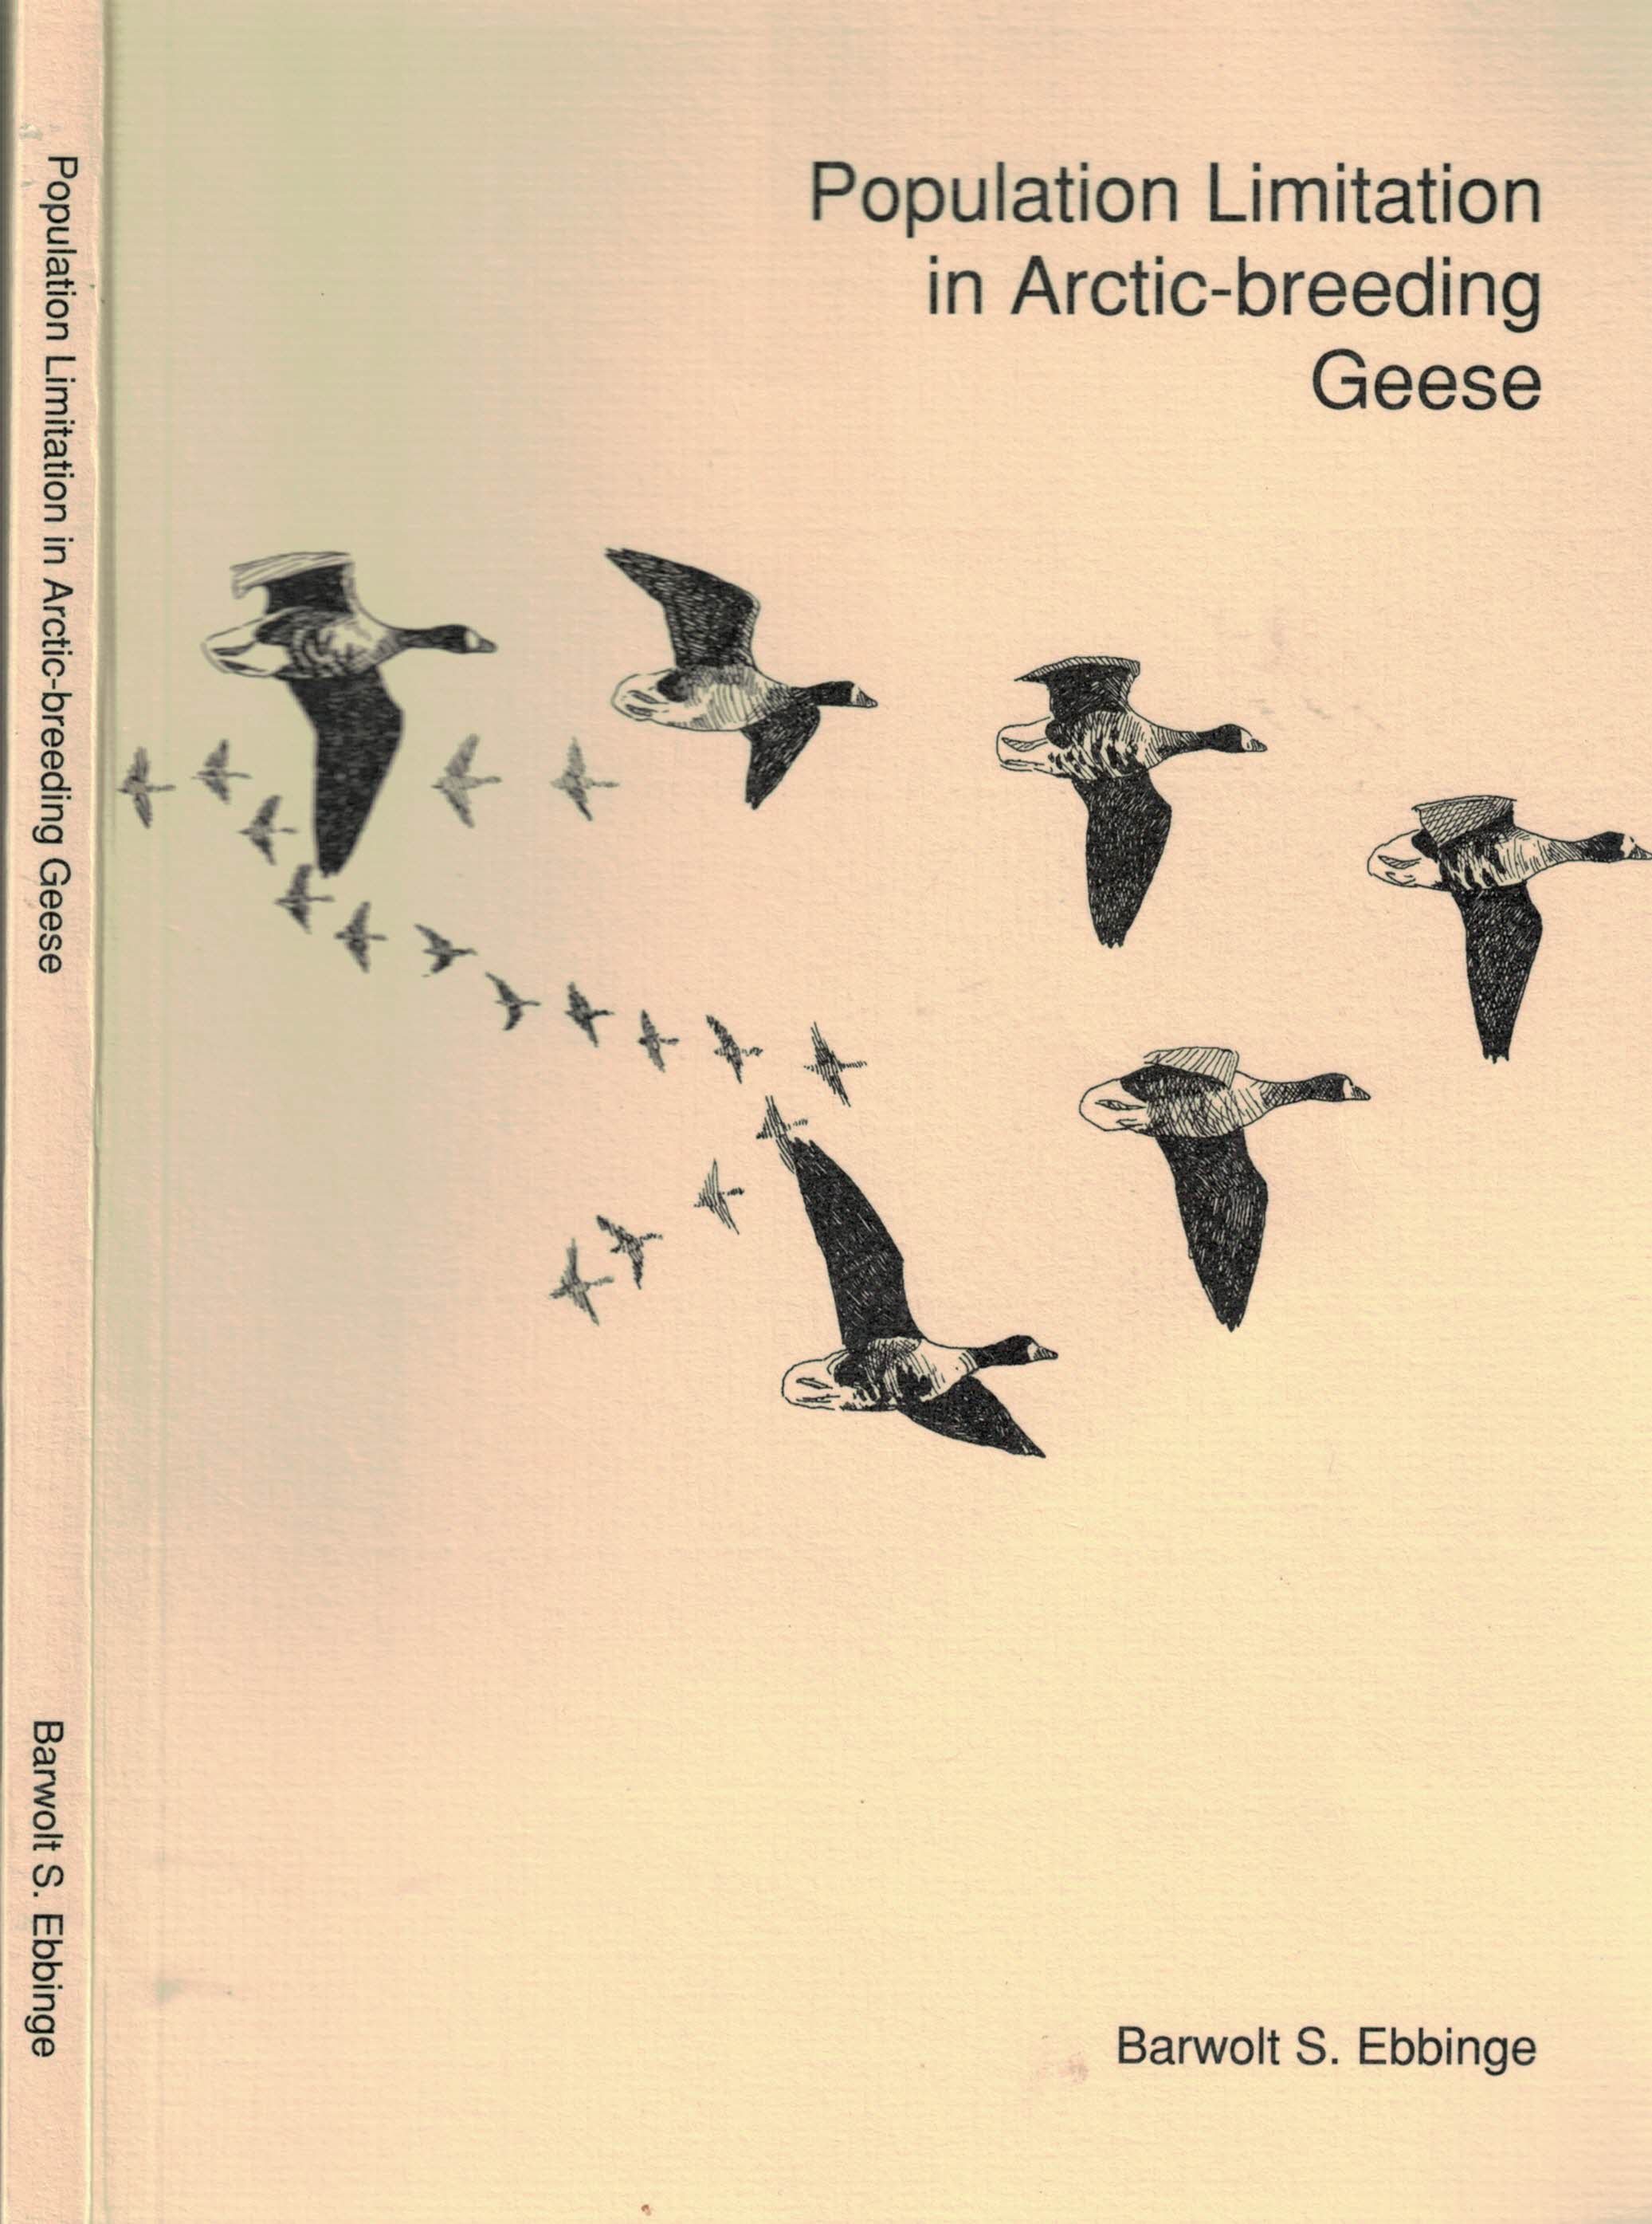 Population Limitation in Arctic-Breeding Geese